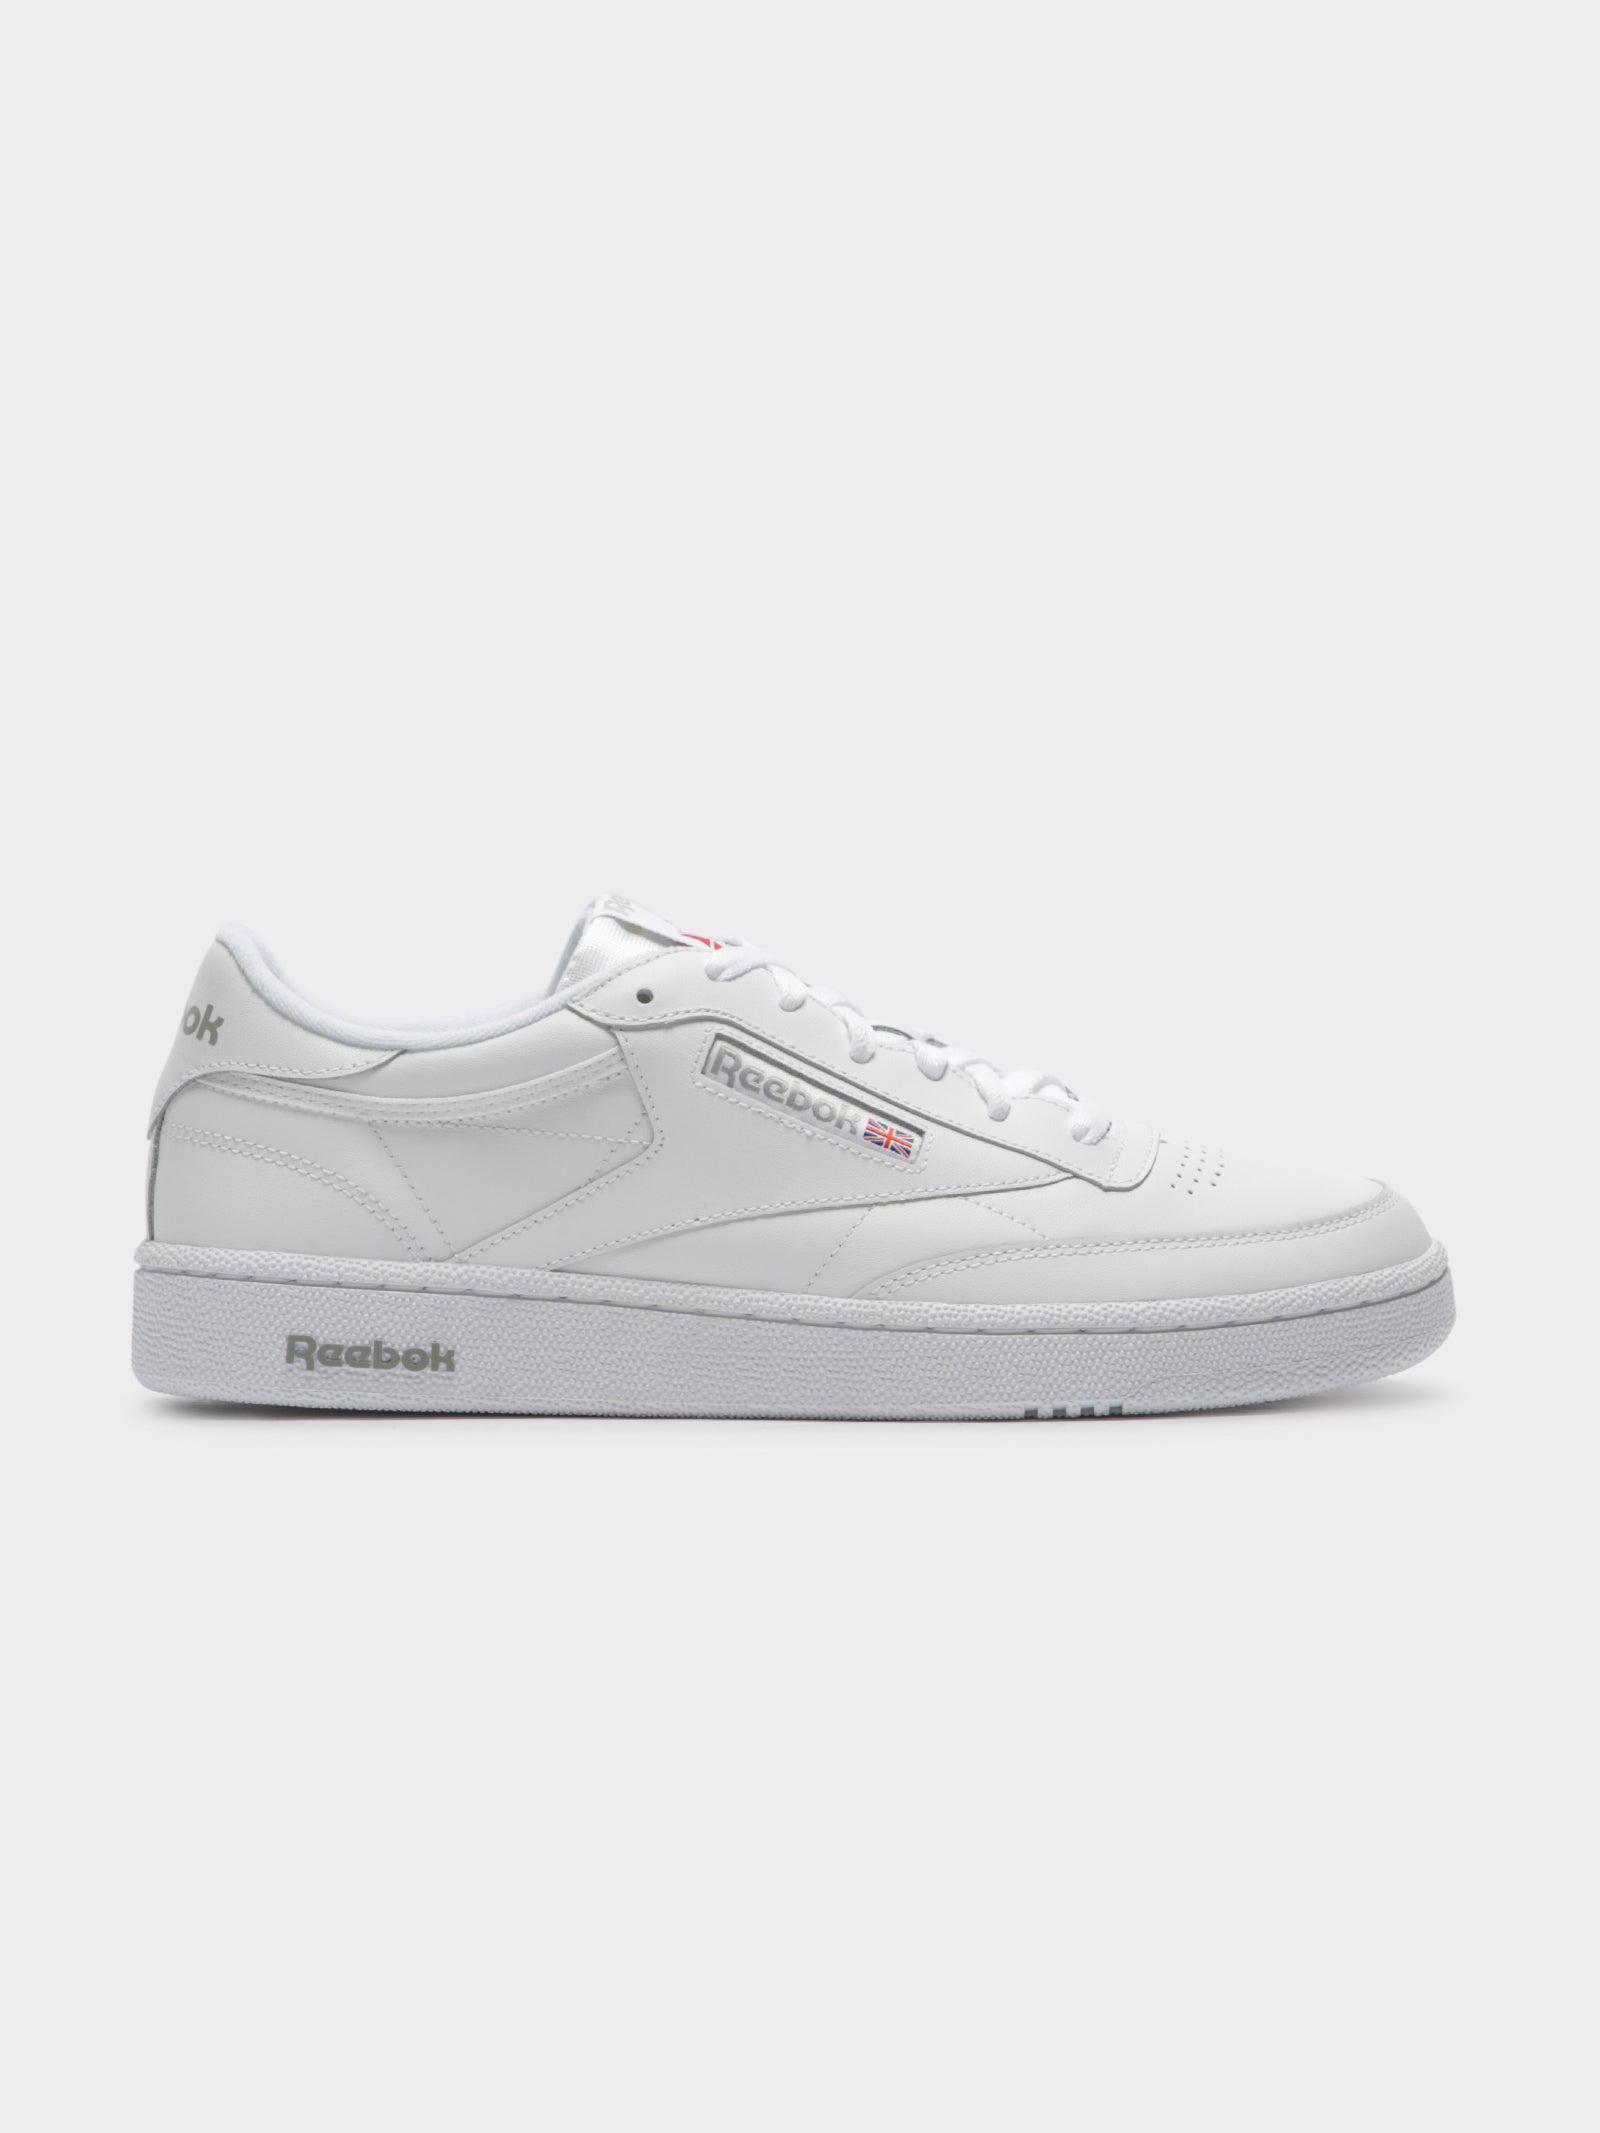 Unisex Club C Sneakers in White & Grey Leather Glue Store